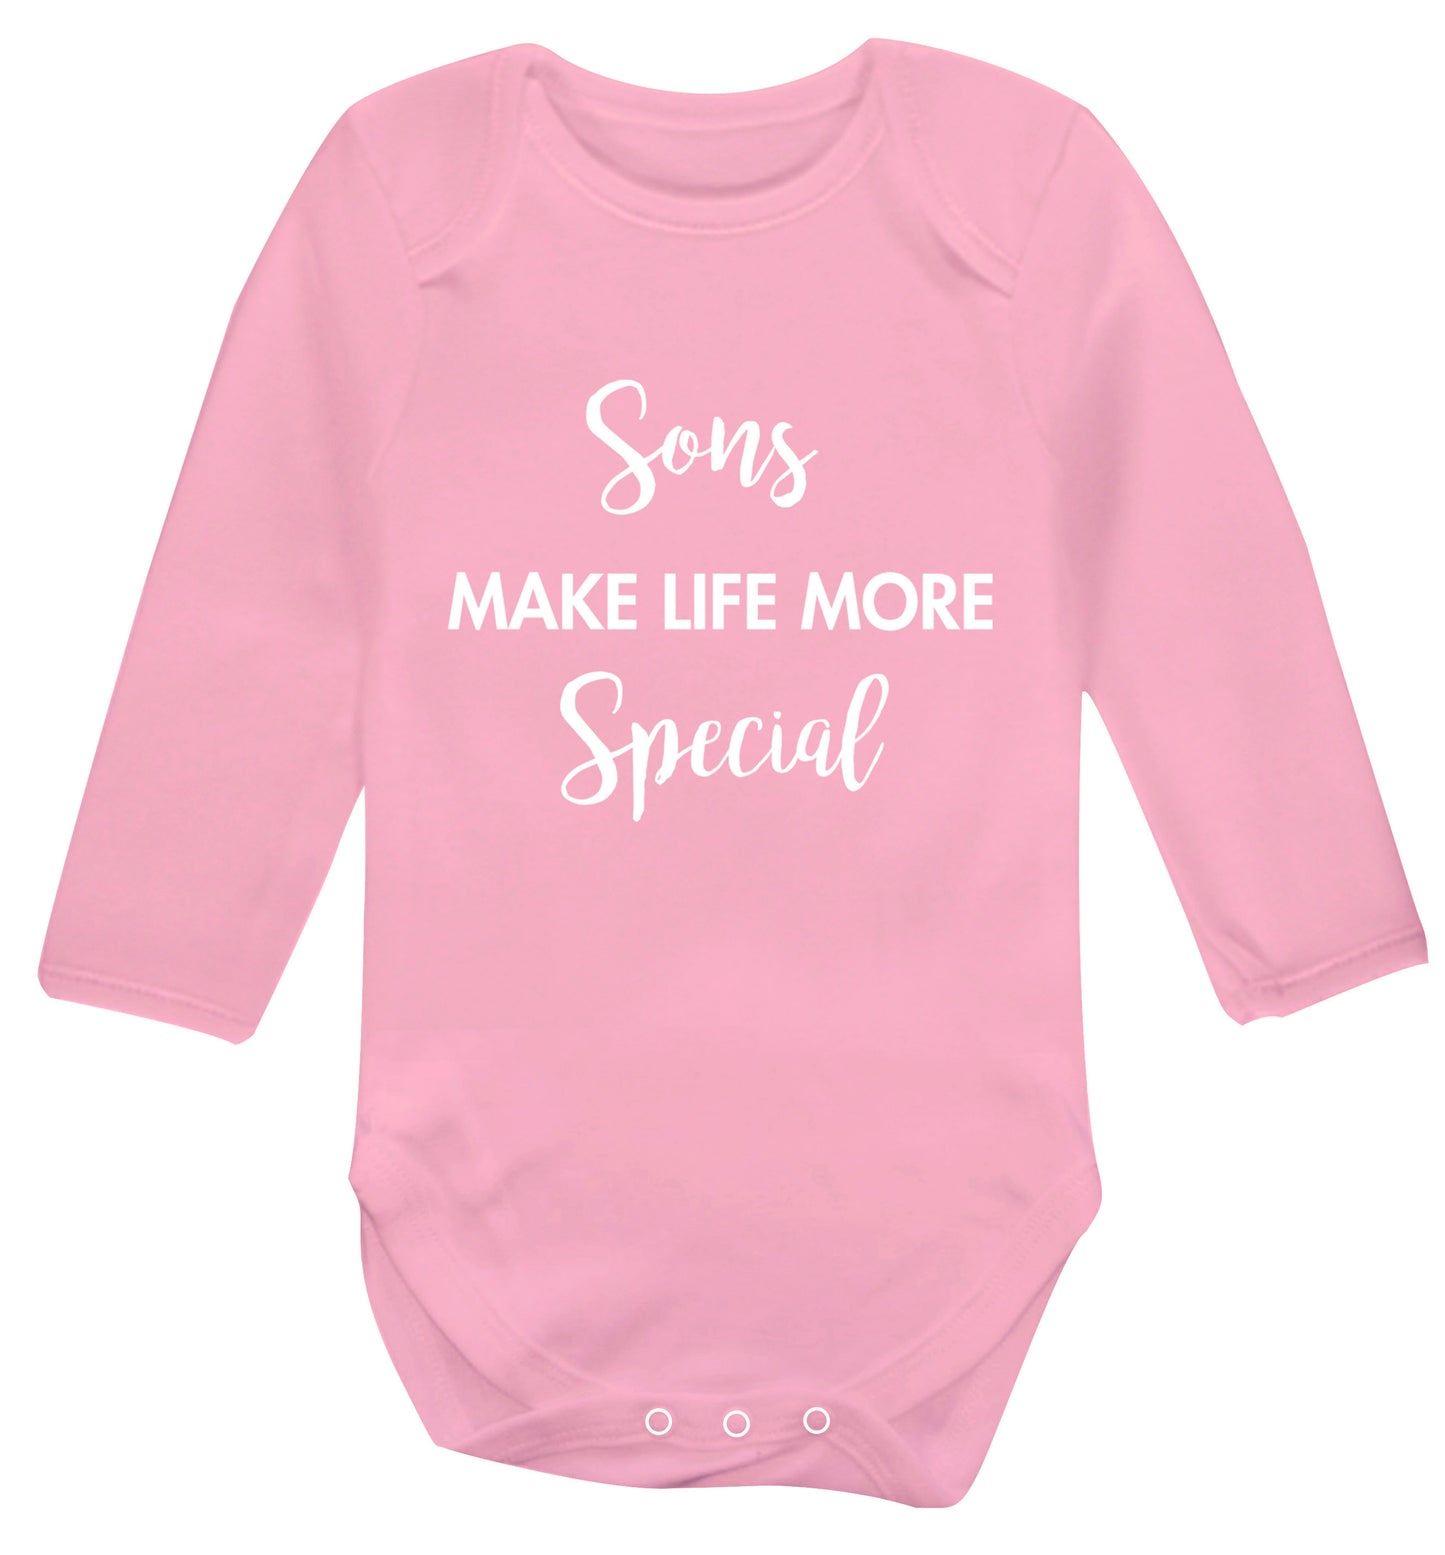 Daughters make life more special Baby Vest long sleeved pale pink 6-12 months